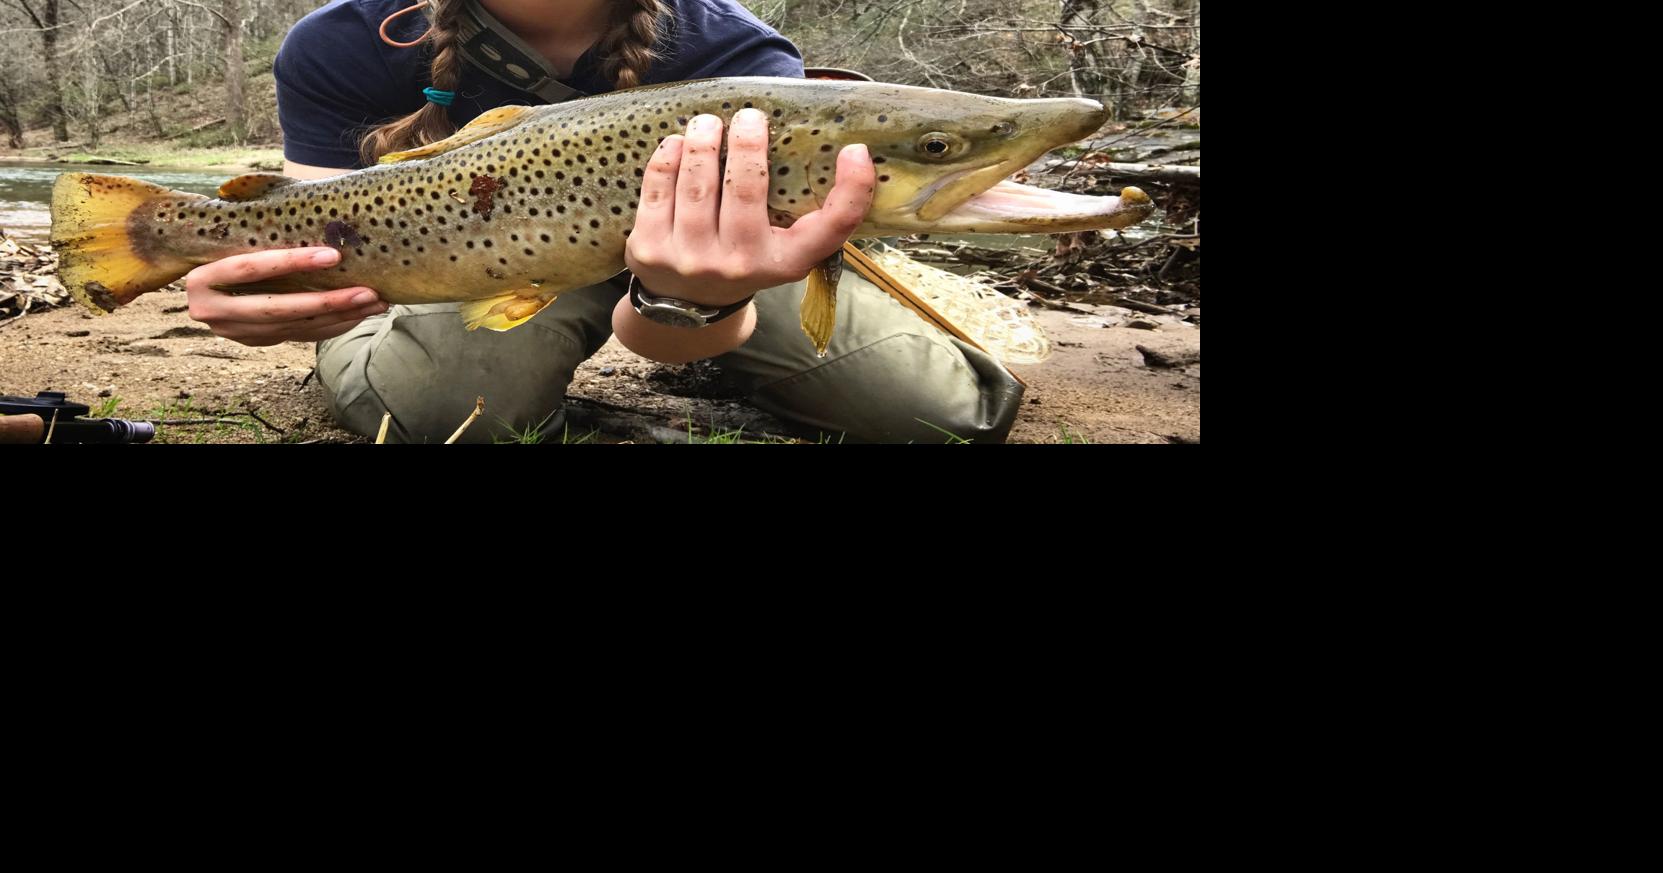 More women try fly fishing to relax